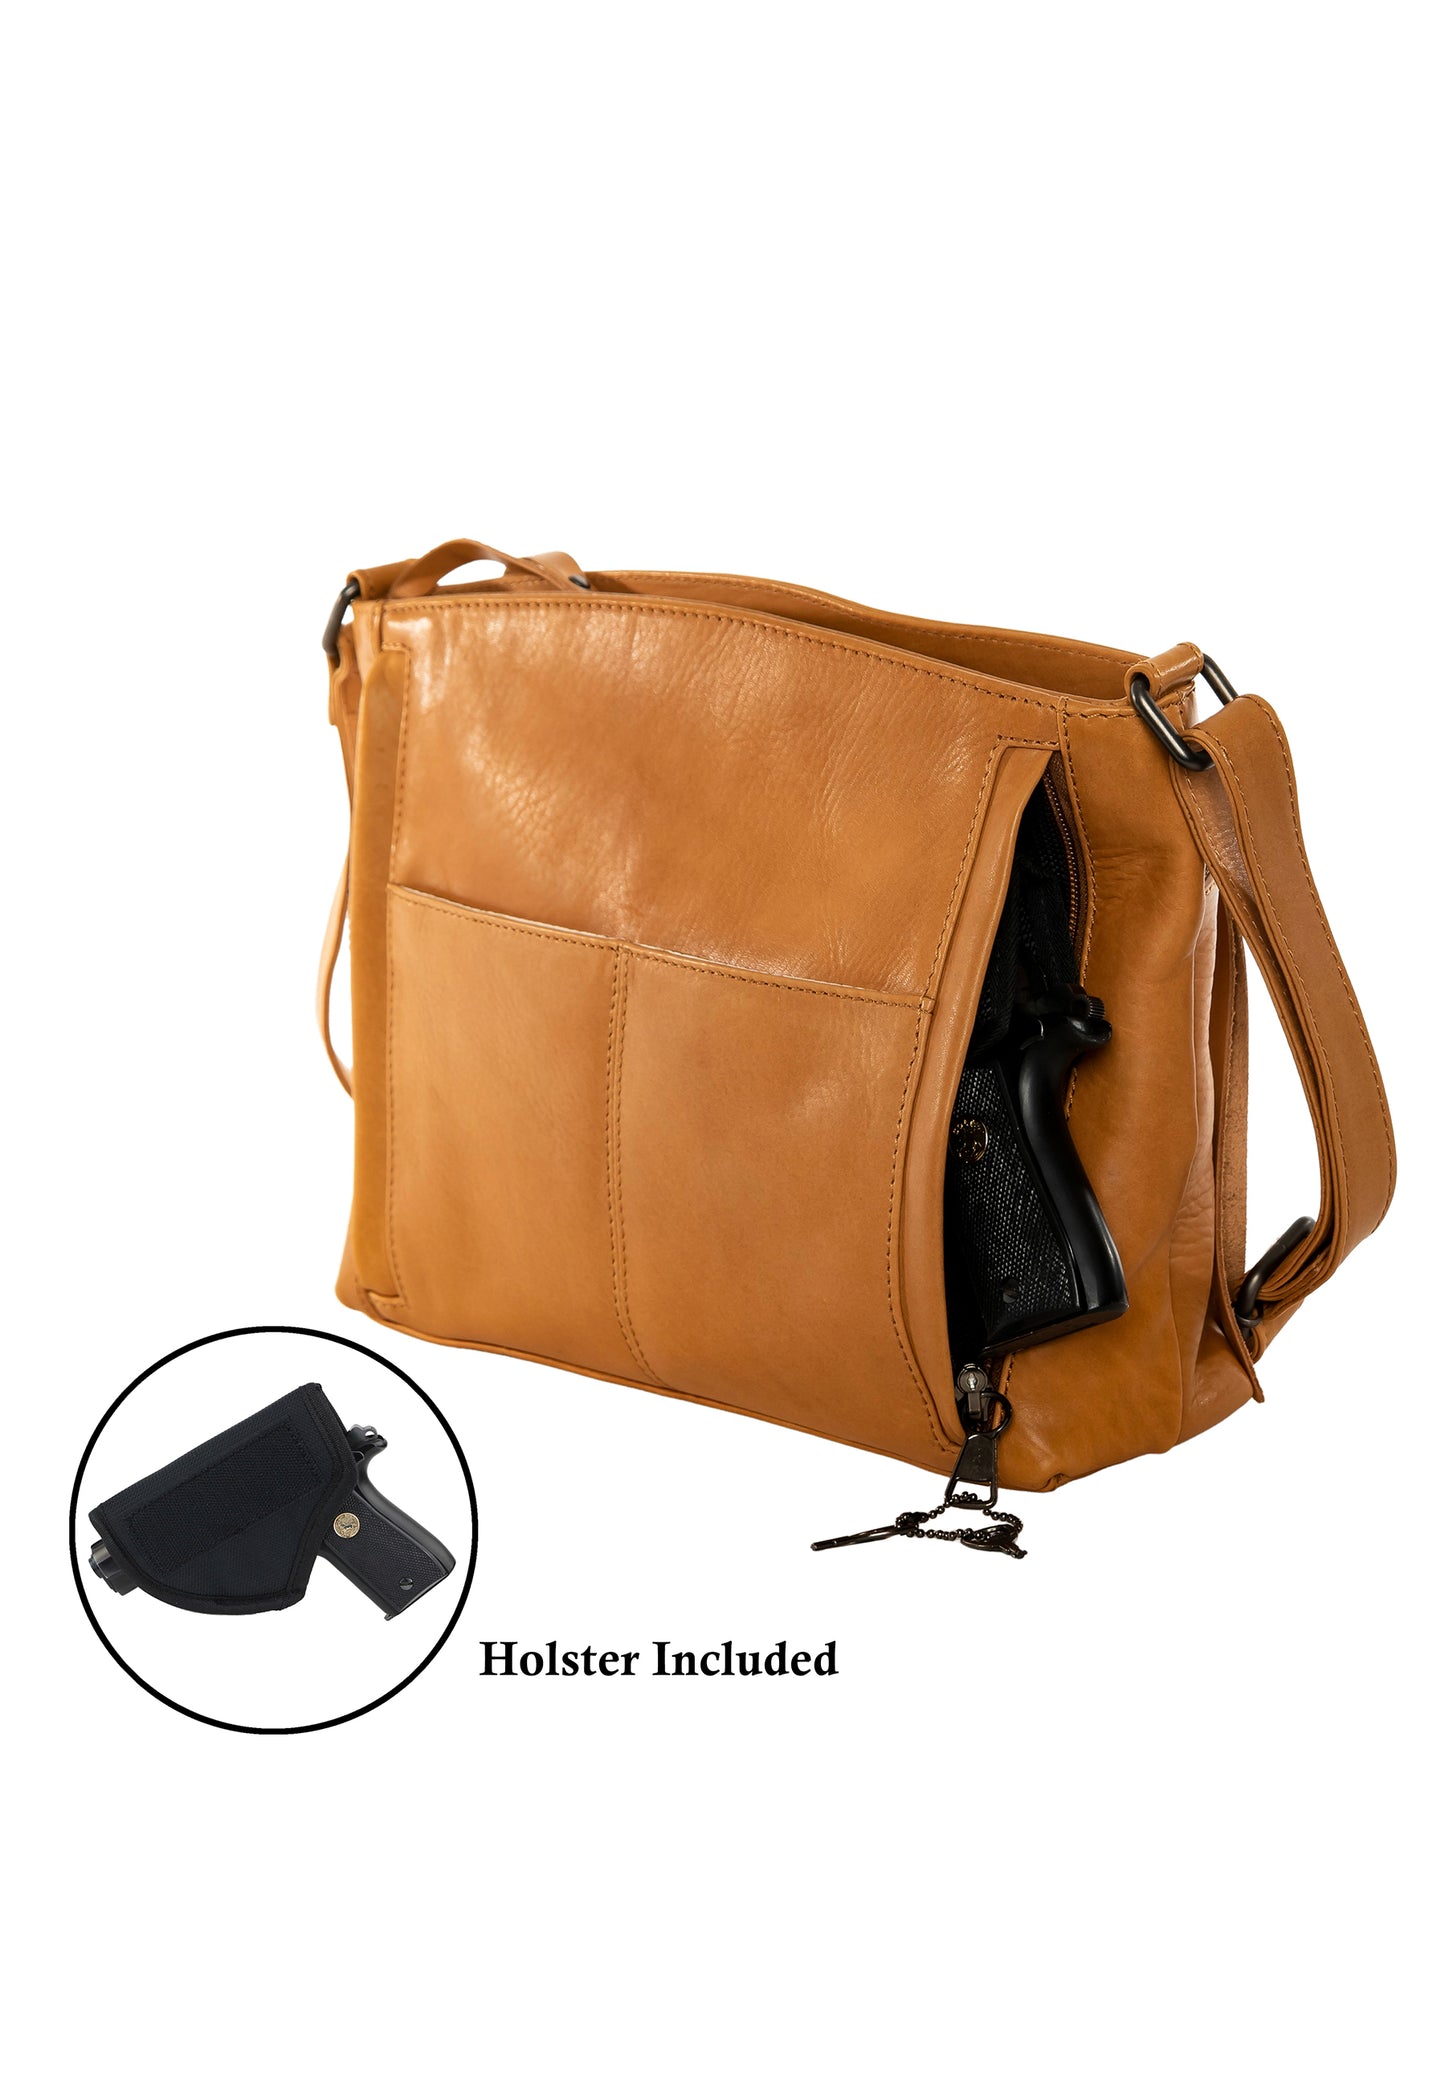 Leather concealed carry purse showing gun in conceal pocket